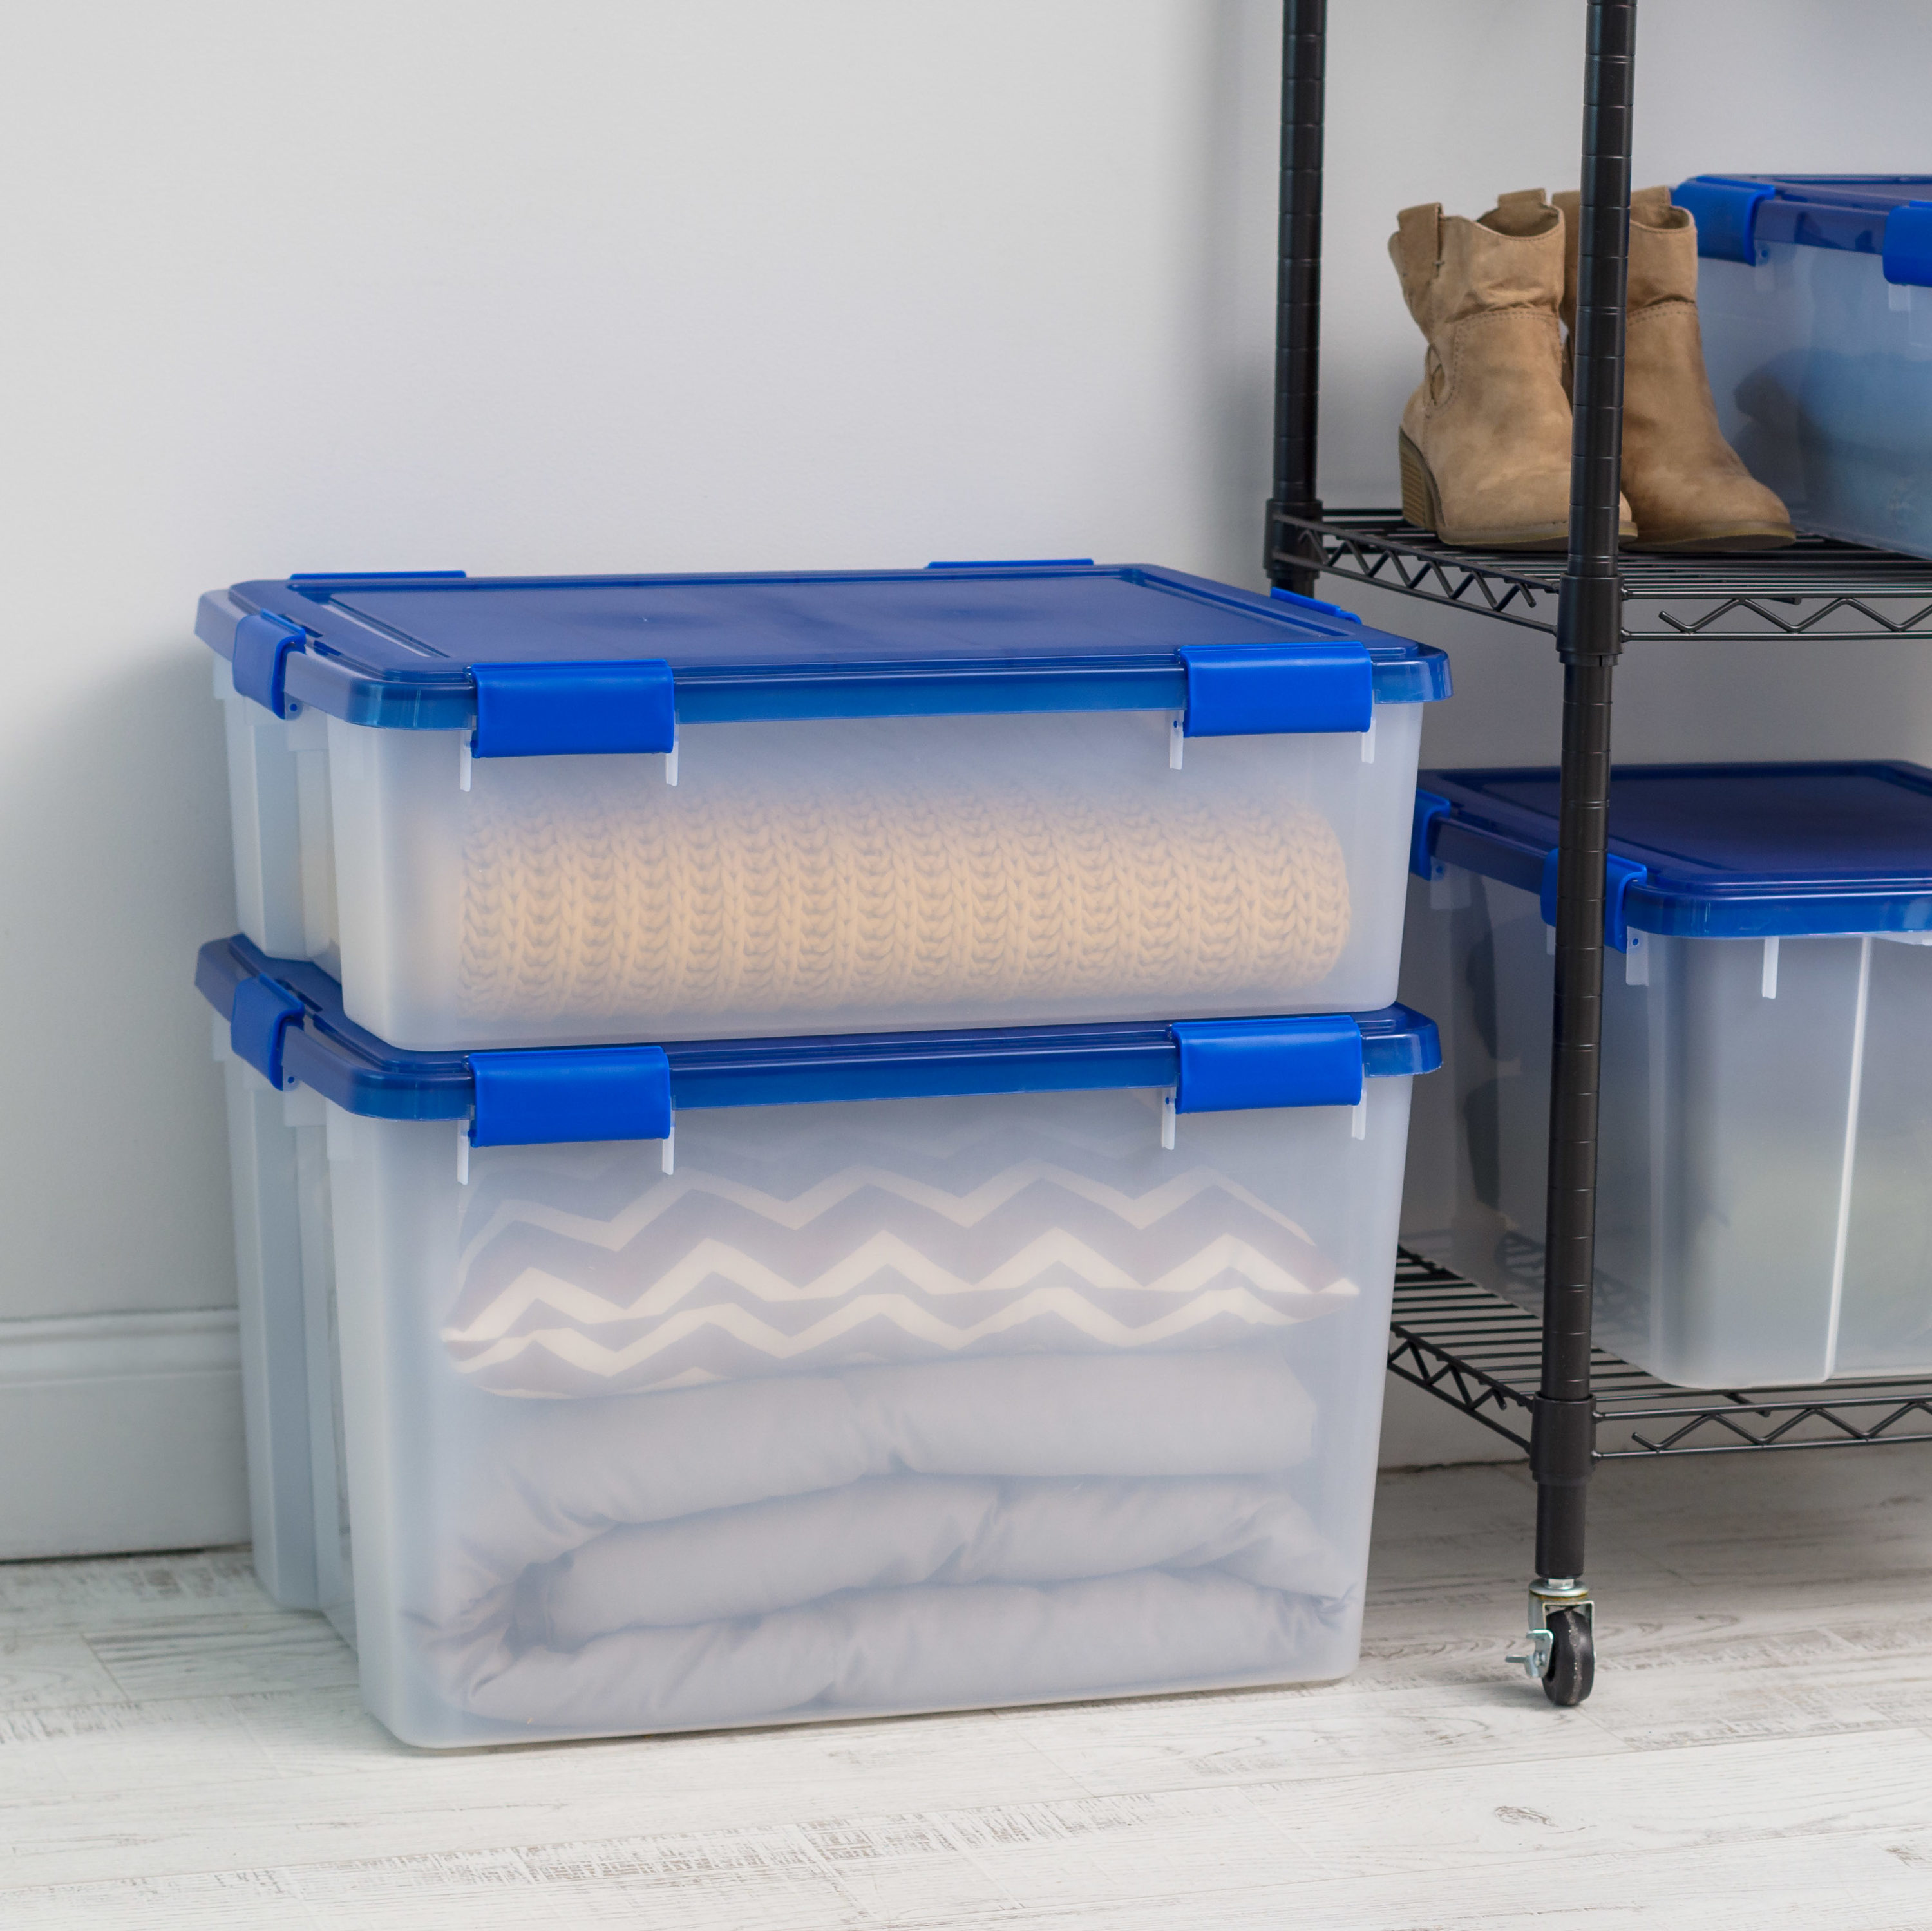 Iris 15 Gallon Clear Plastic Storage Boxes with Blue Lid, Pack of 4